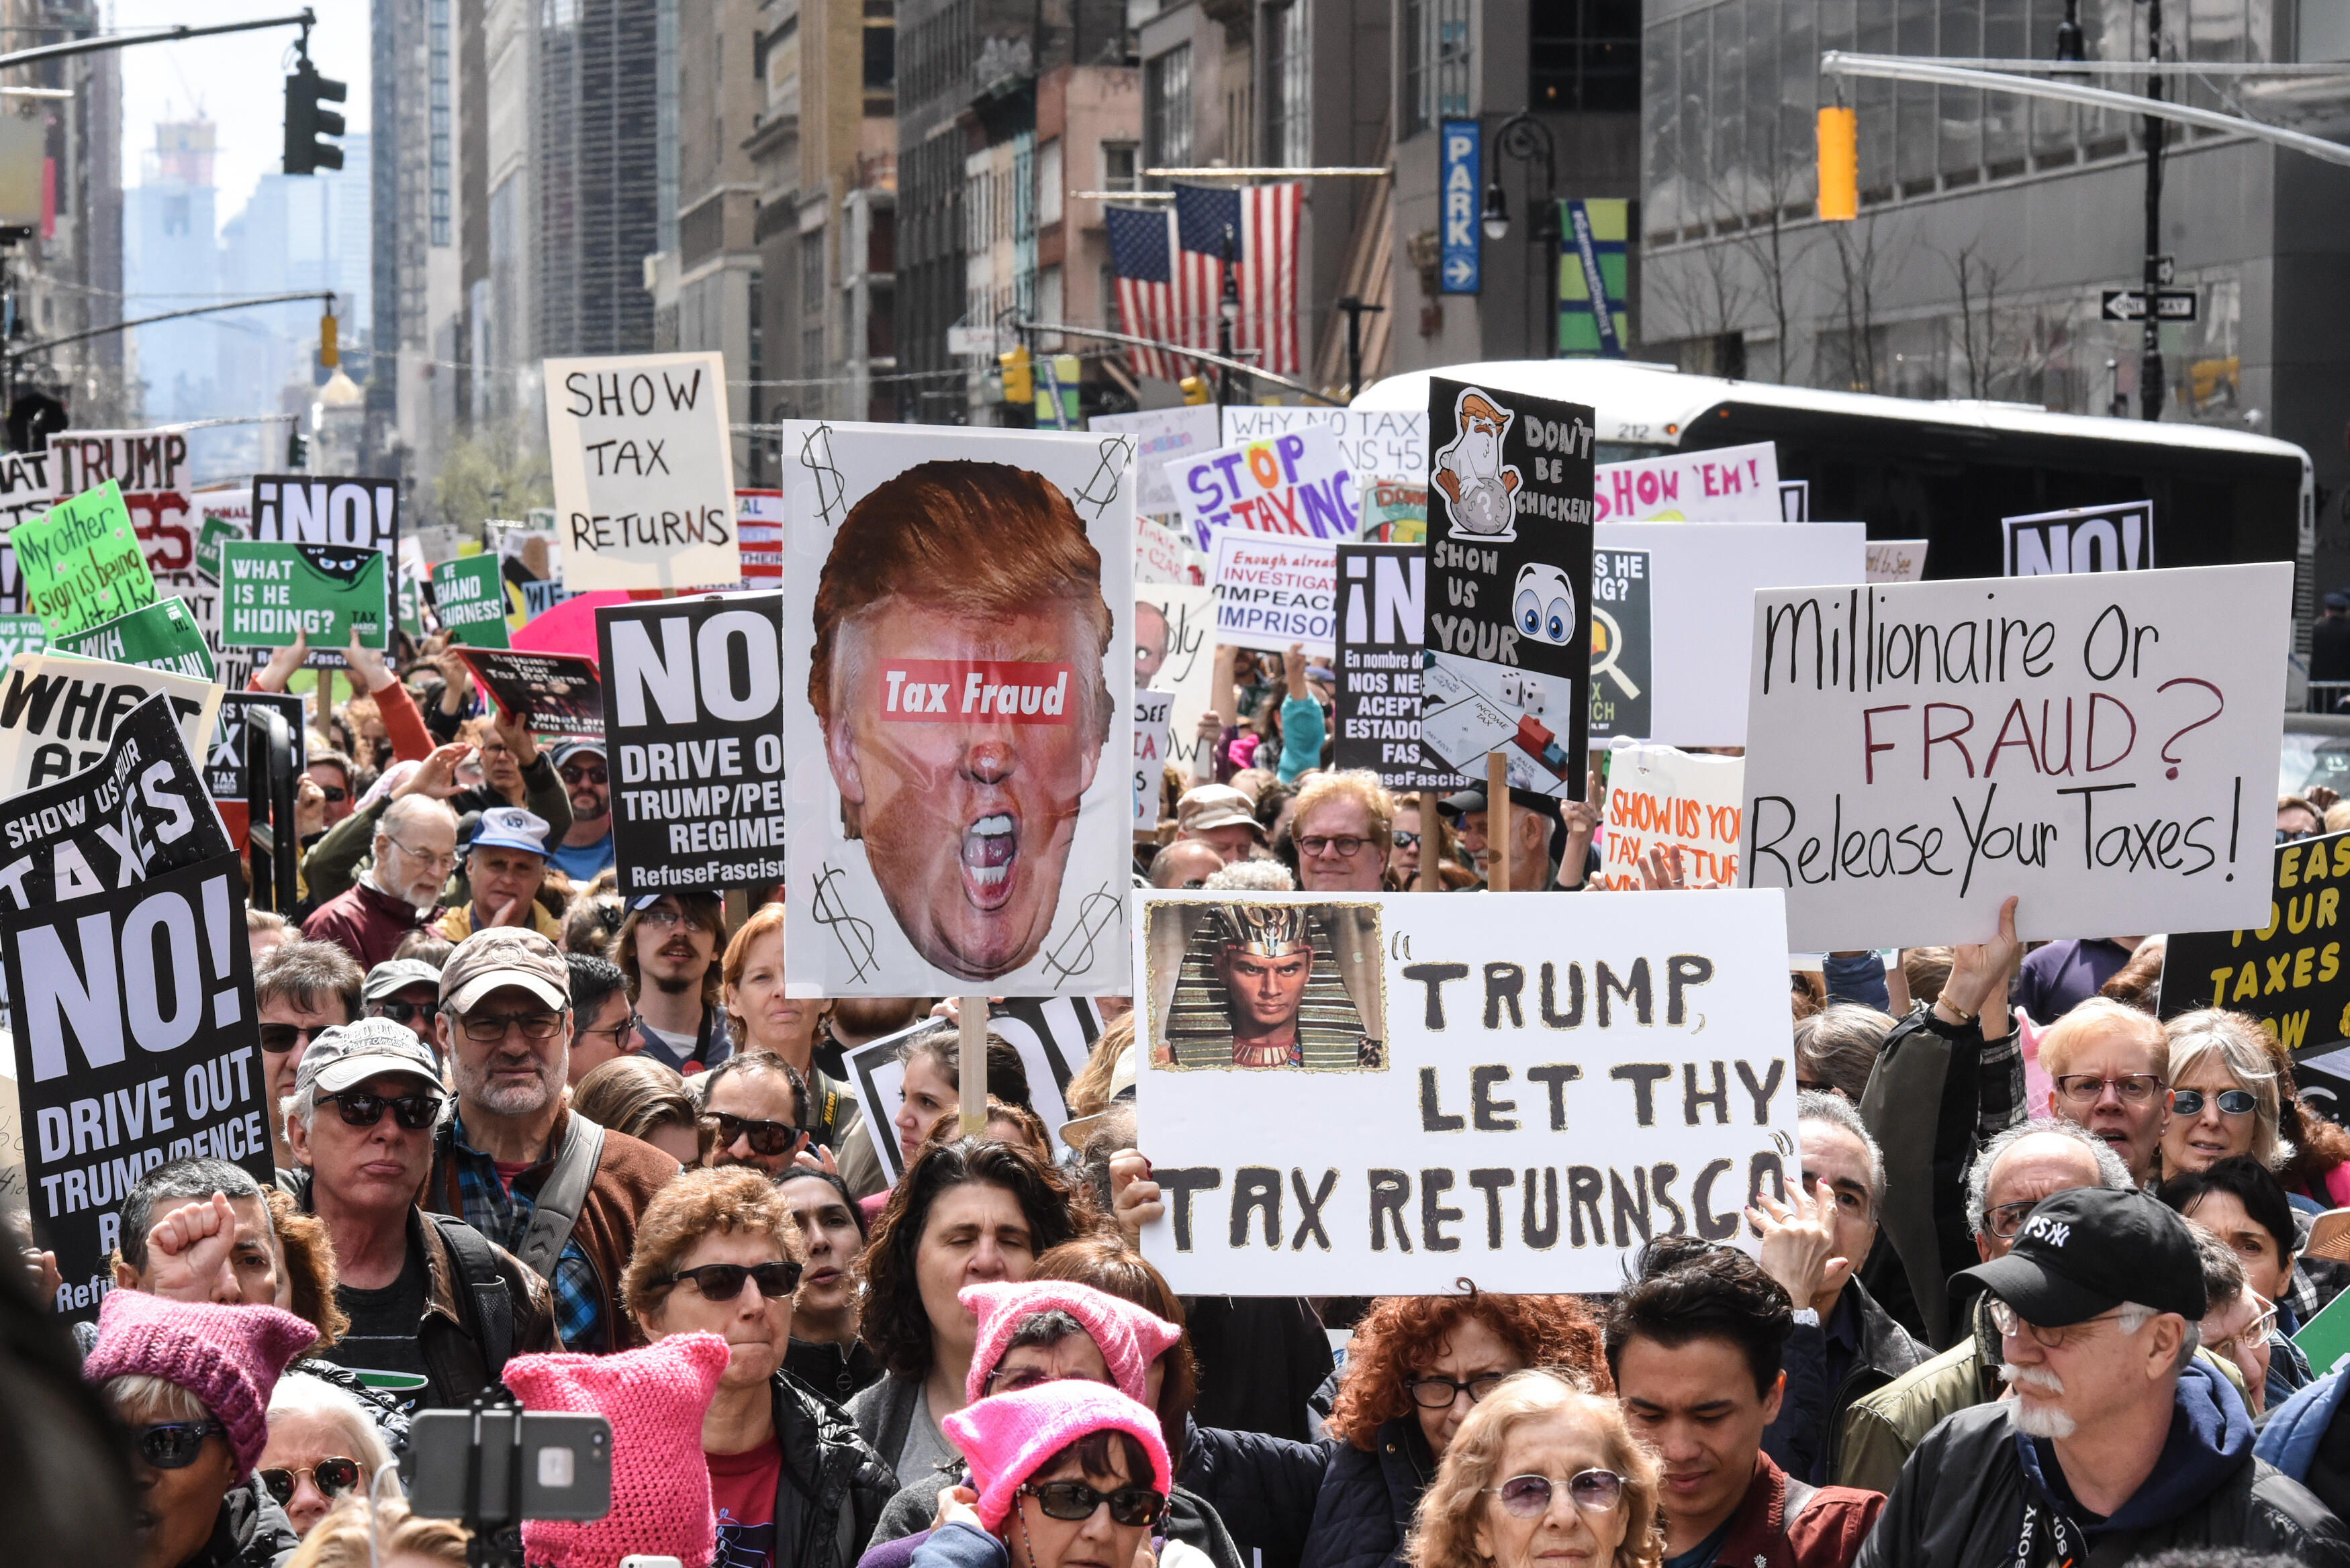 NEW YORK, NY - APRIL 15: People participate in a Tax Day protest on April 15, 2017 in New York City. Activists in cities across the nation are marching today to call on President Donald Trump to release his tax returns. (Photo by Stephanie Keith/Getty Ima